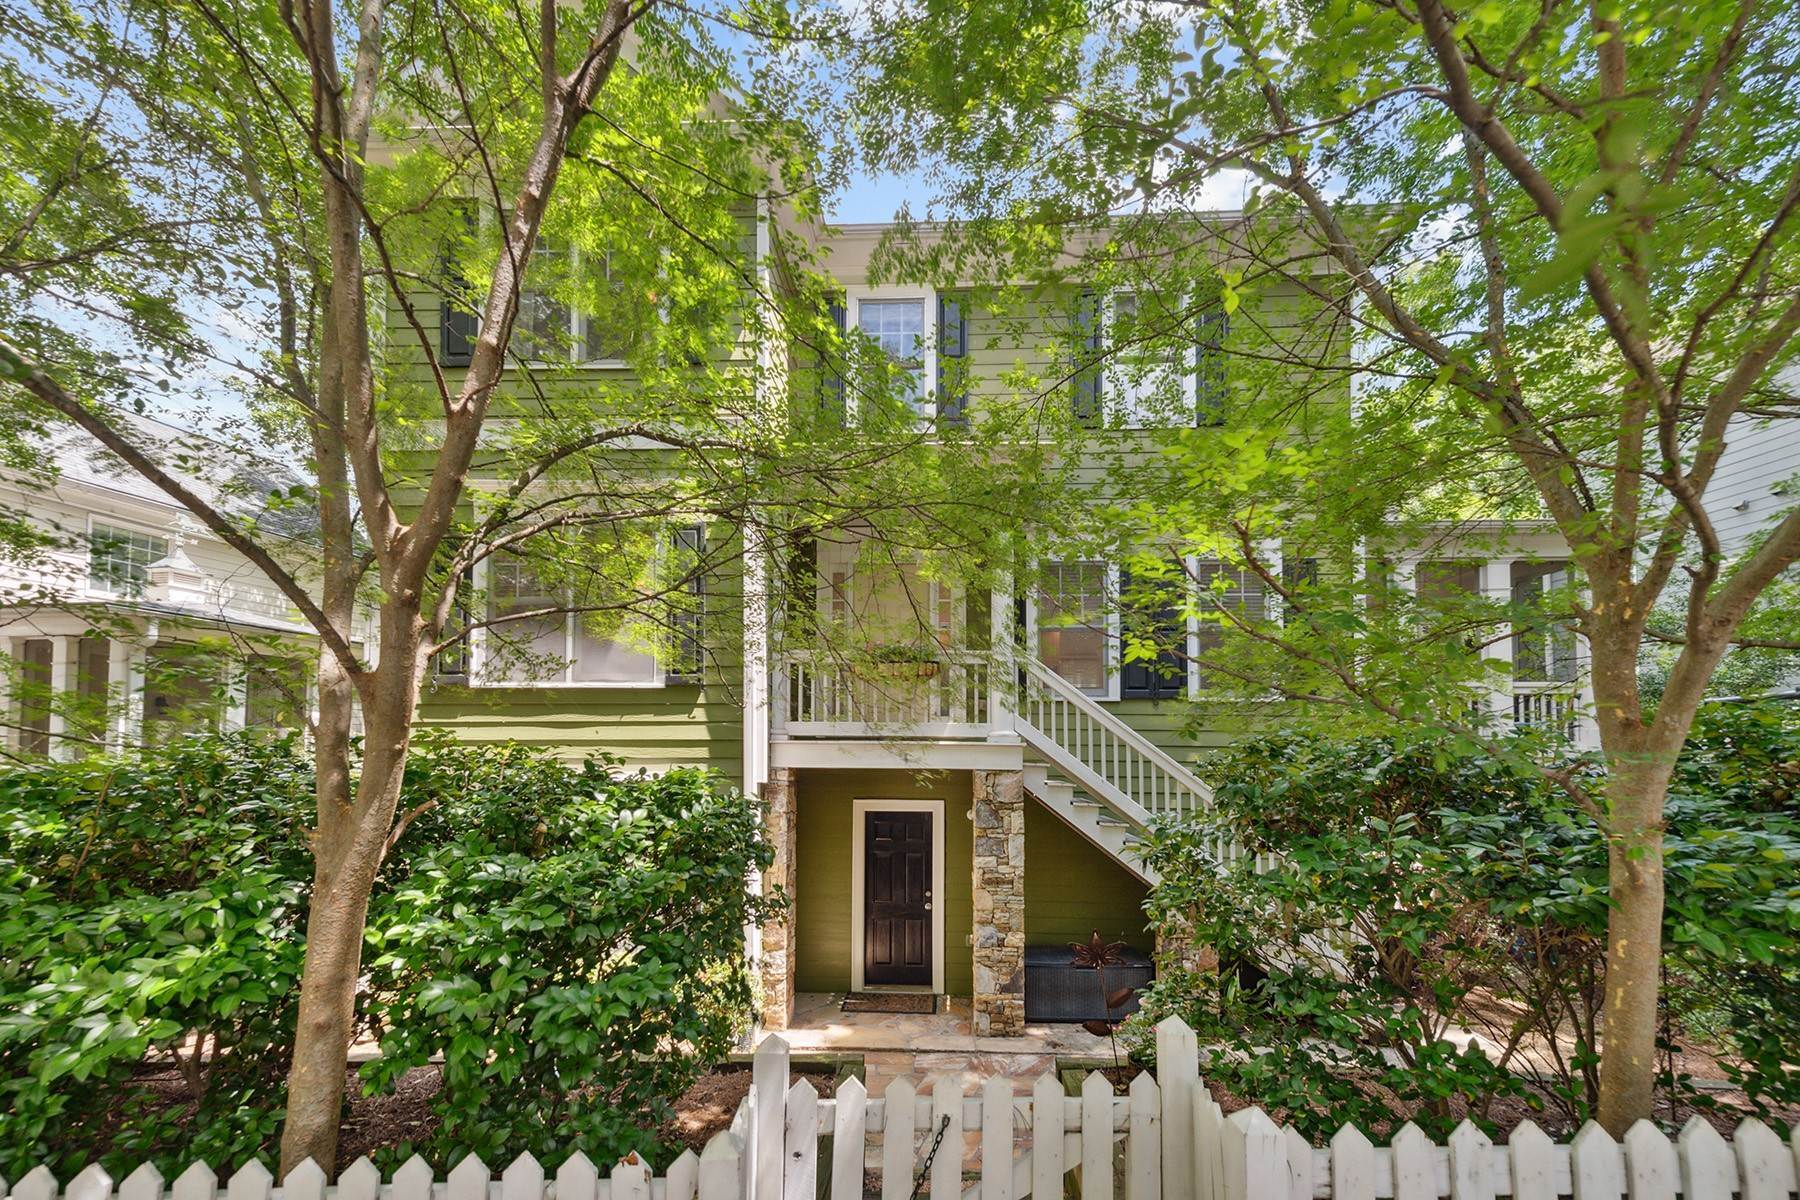 Single Family Homes for Sale at Gorgeous, Updated Gem with a Million-Dollar Kitchen in Morningside 1341 Edmund Park Drive Ne Atlanta, Georgia 30306 United States